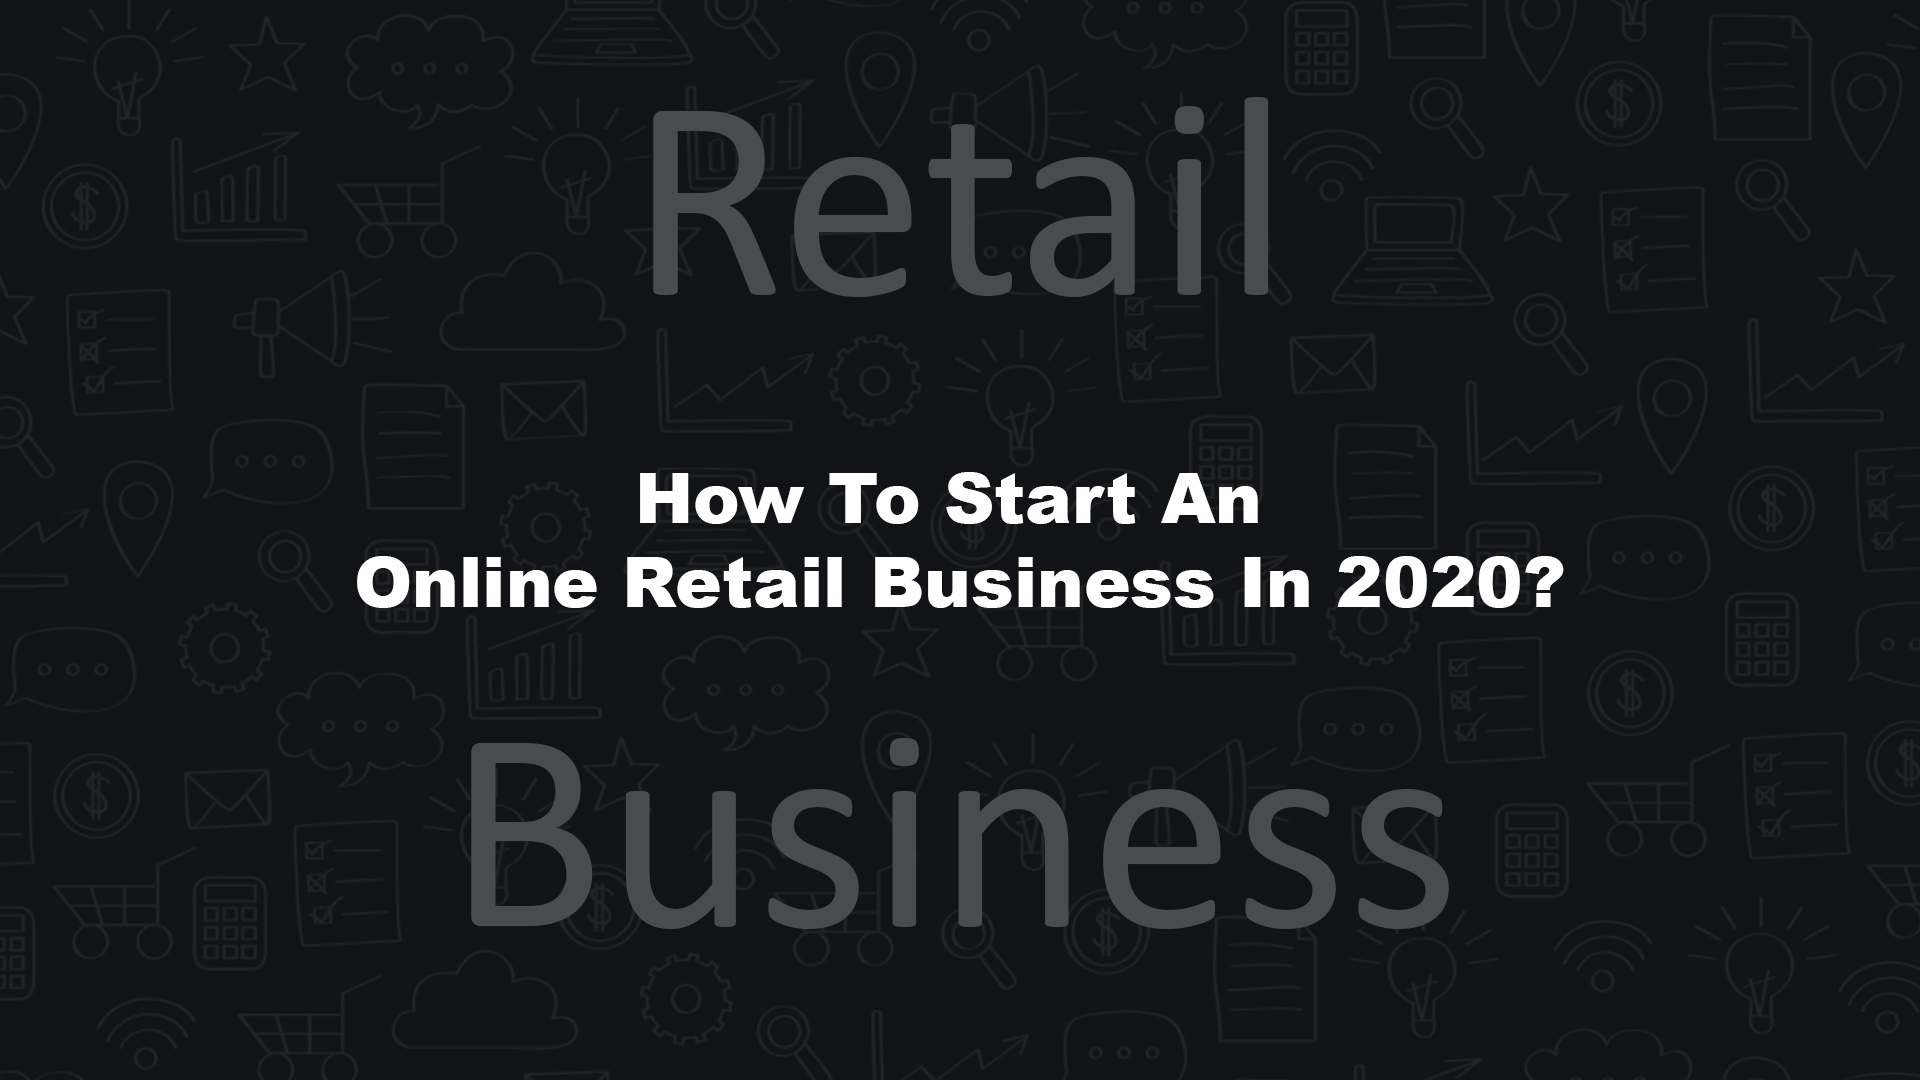 Online Retail Business In 2020